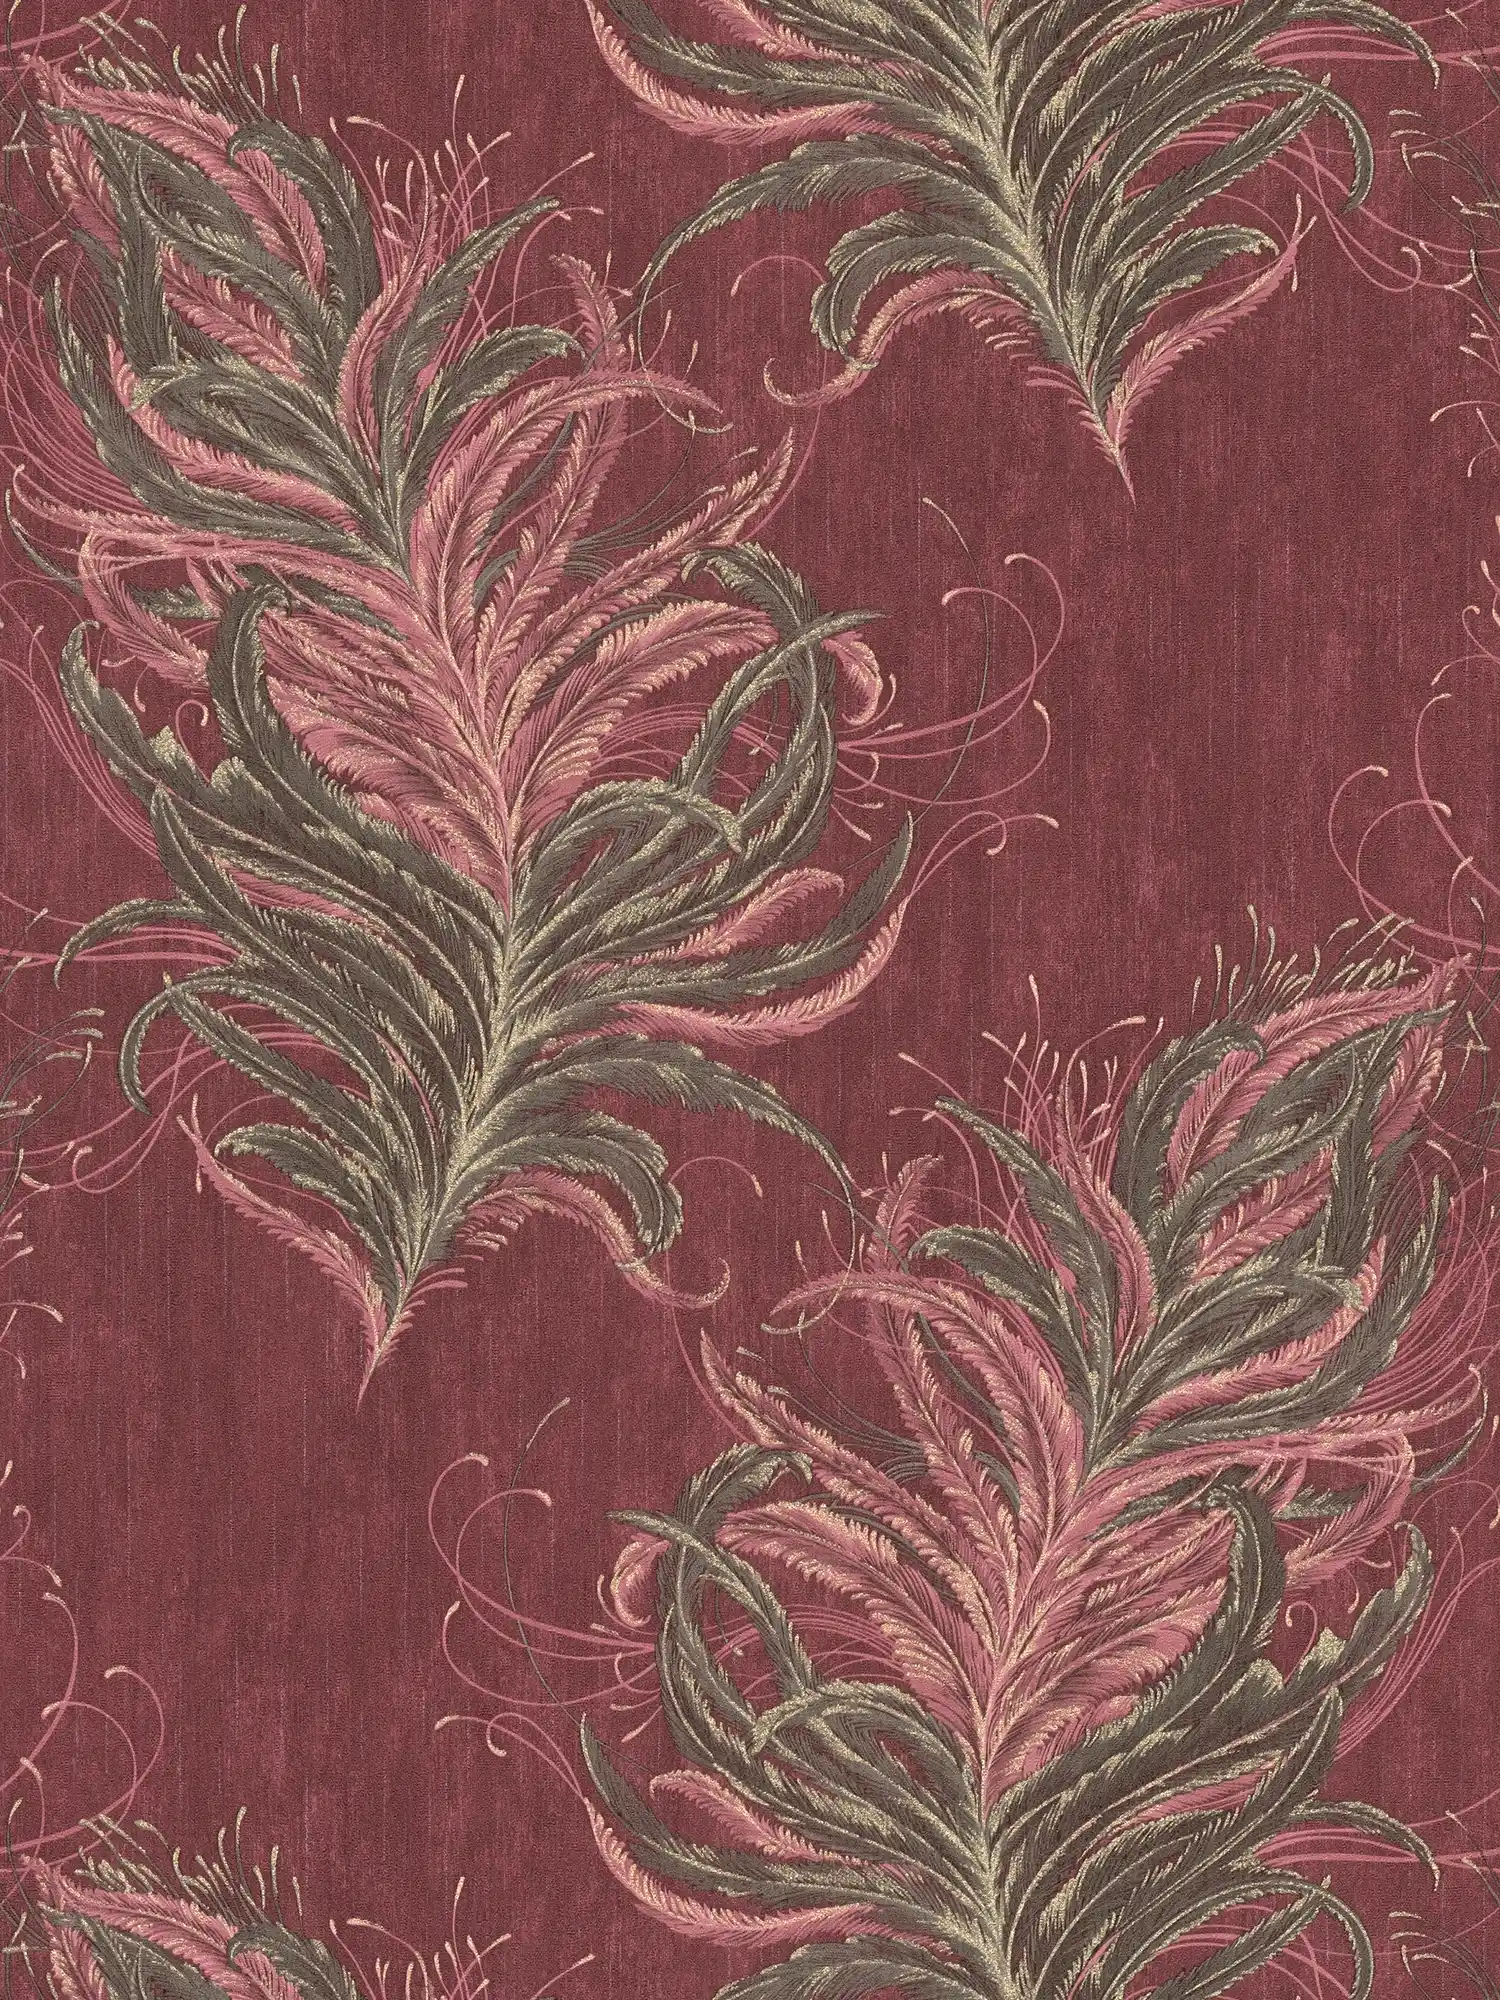 Red wallpaper with feathers, gold design & texture effect
